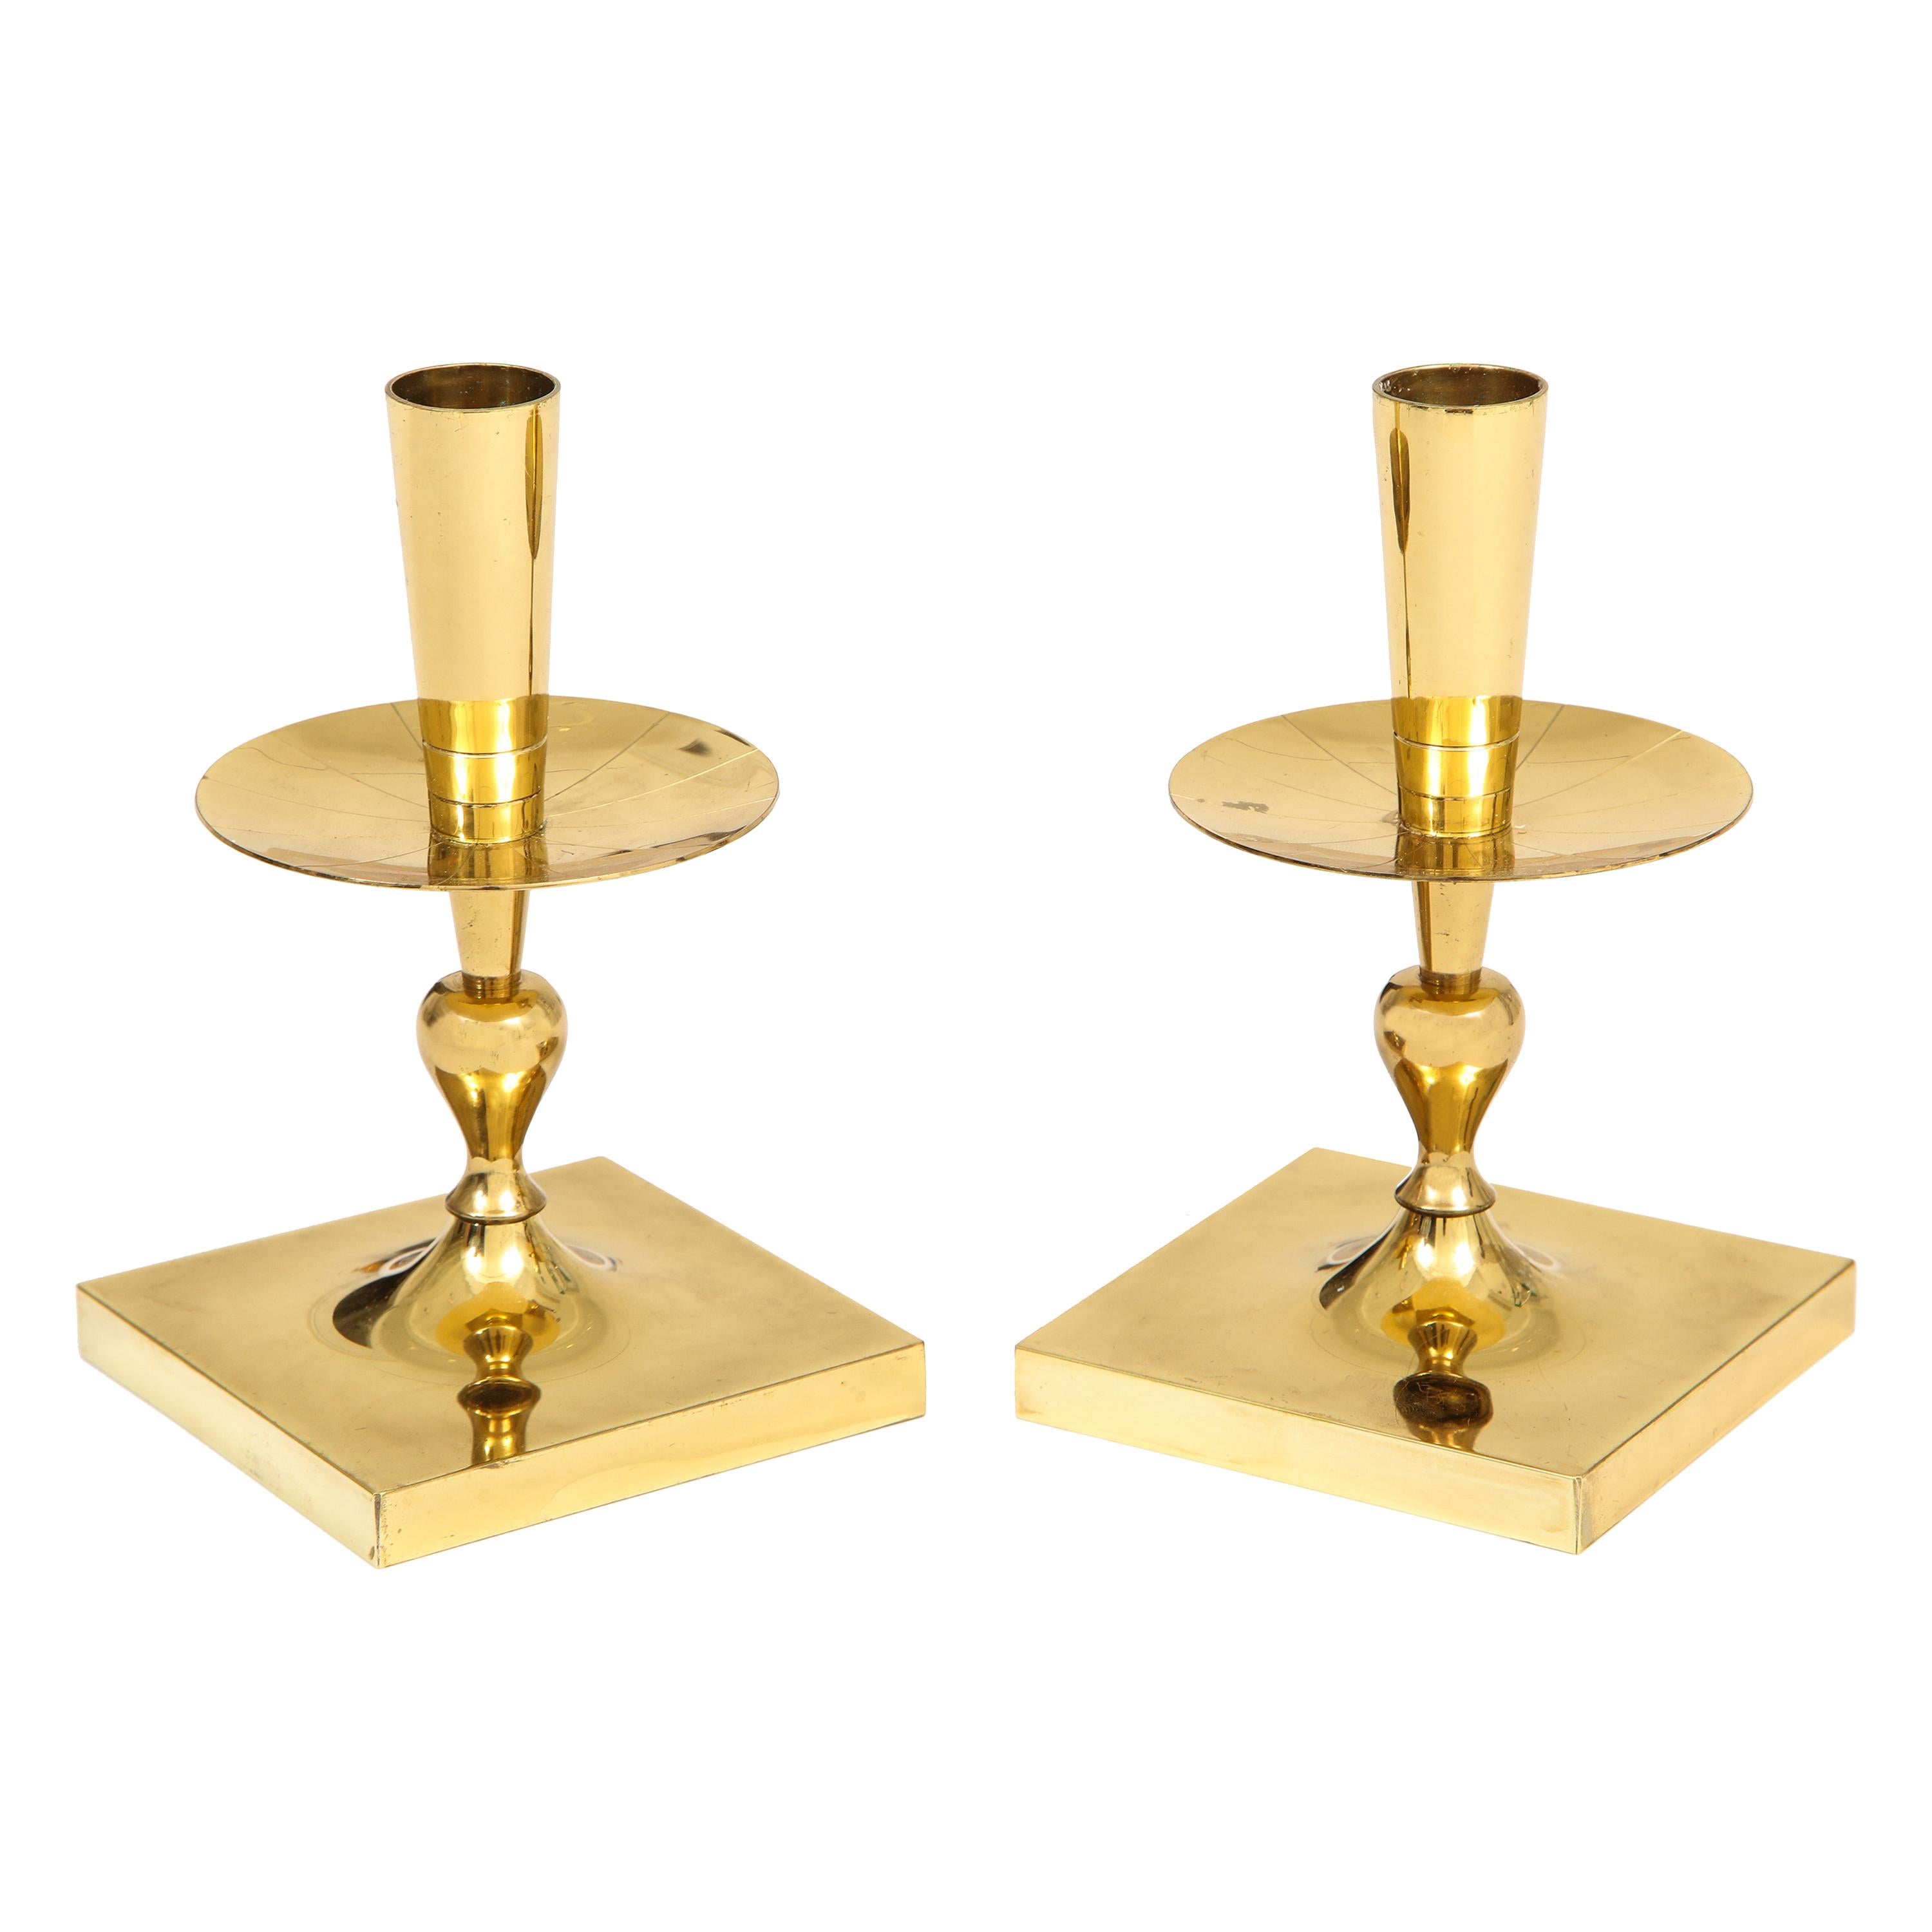 Tommi Parzinger candlesticks brass signed. Small scale pair of candlesticks both signed on the undersides: 